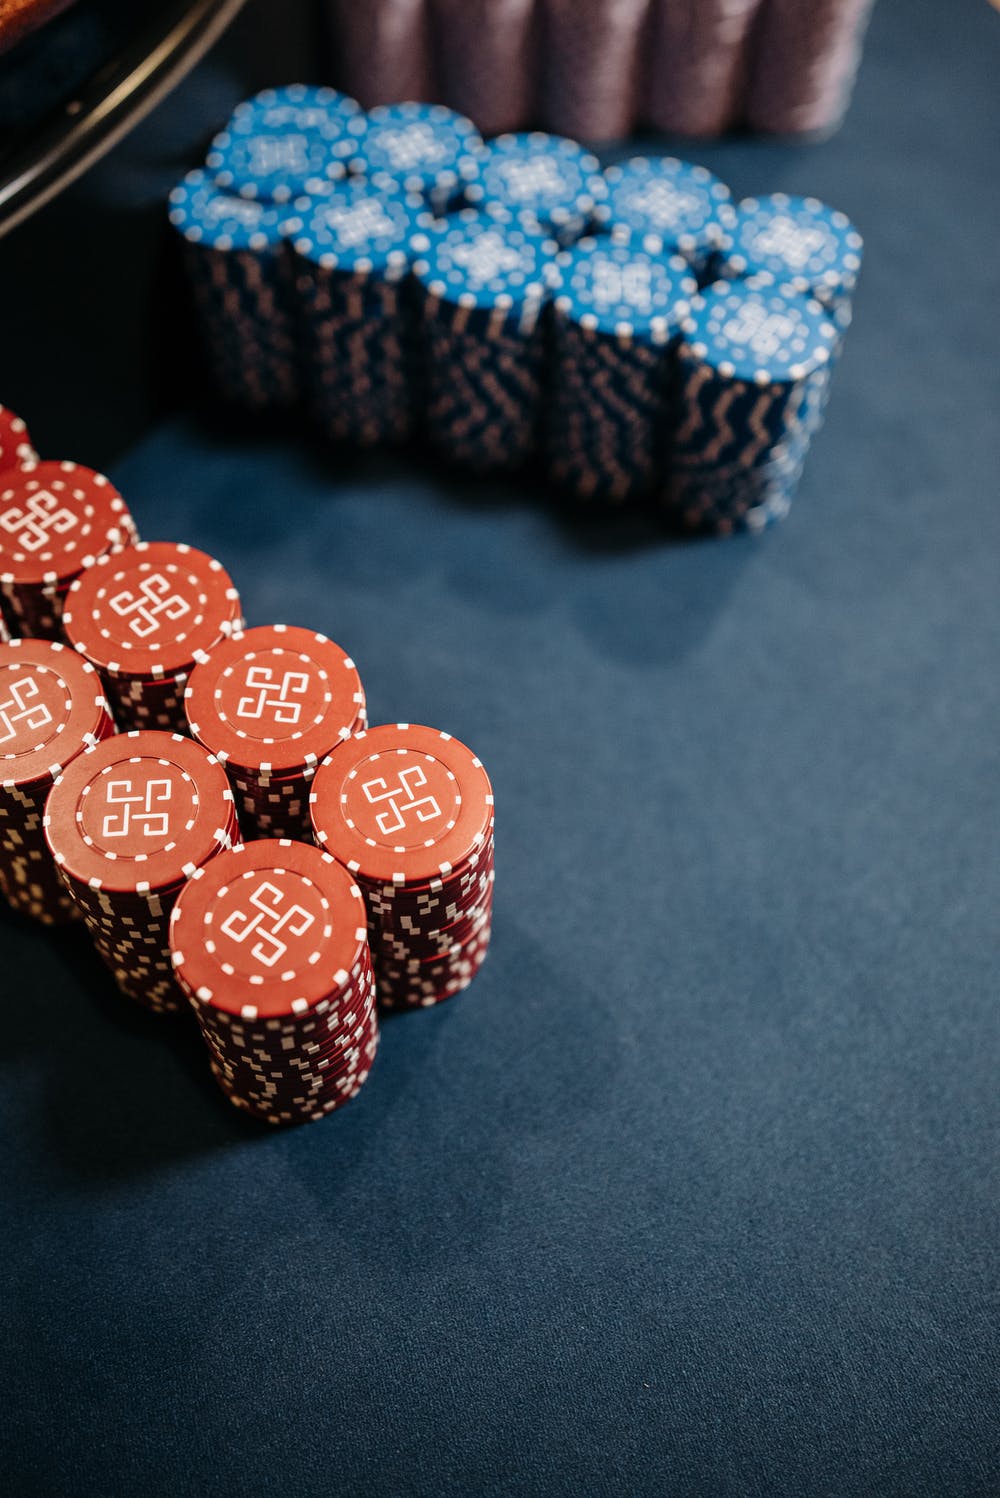 Flip-up accurately throughout texas holdem with 2021